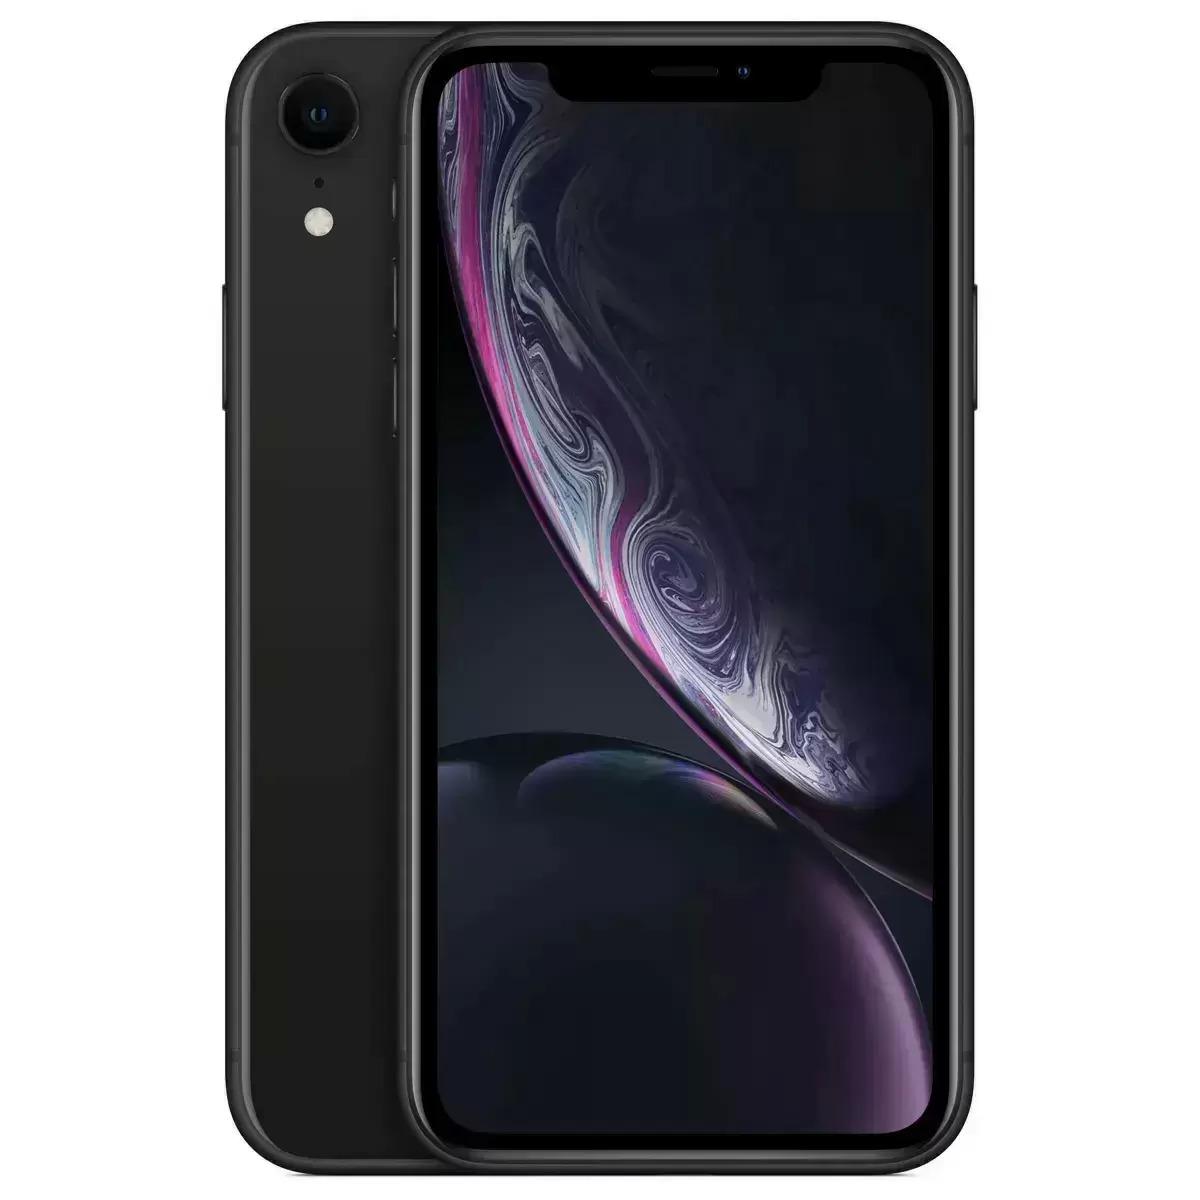 Apple iPhone XR + 3 Month Pre-Paid Boost Mobile Unlimited Plan for $99